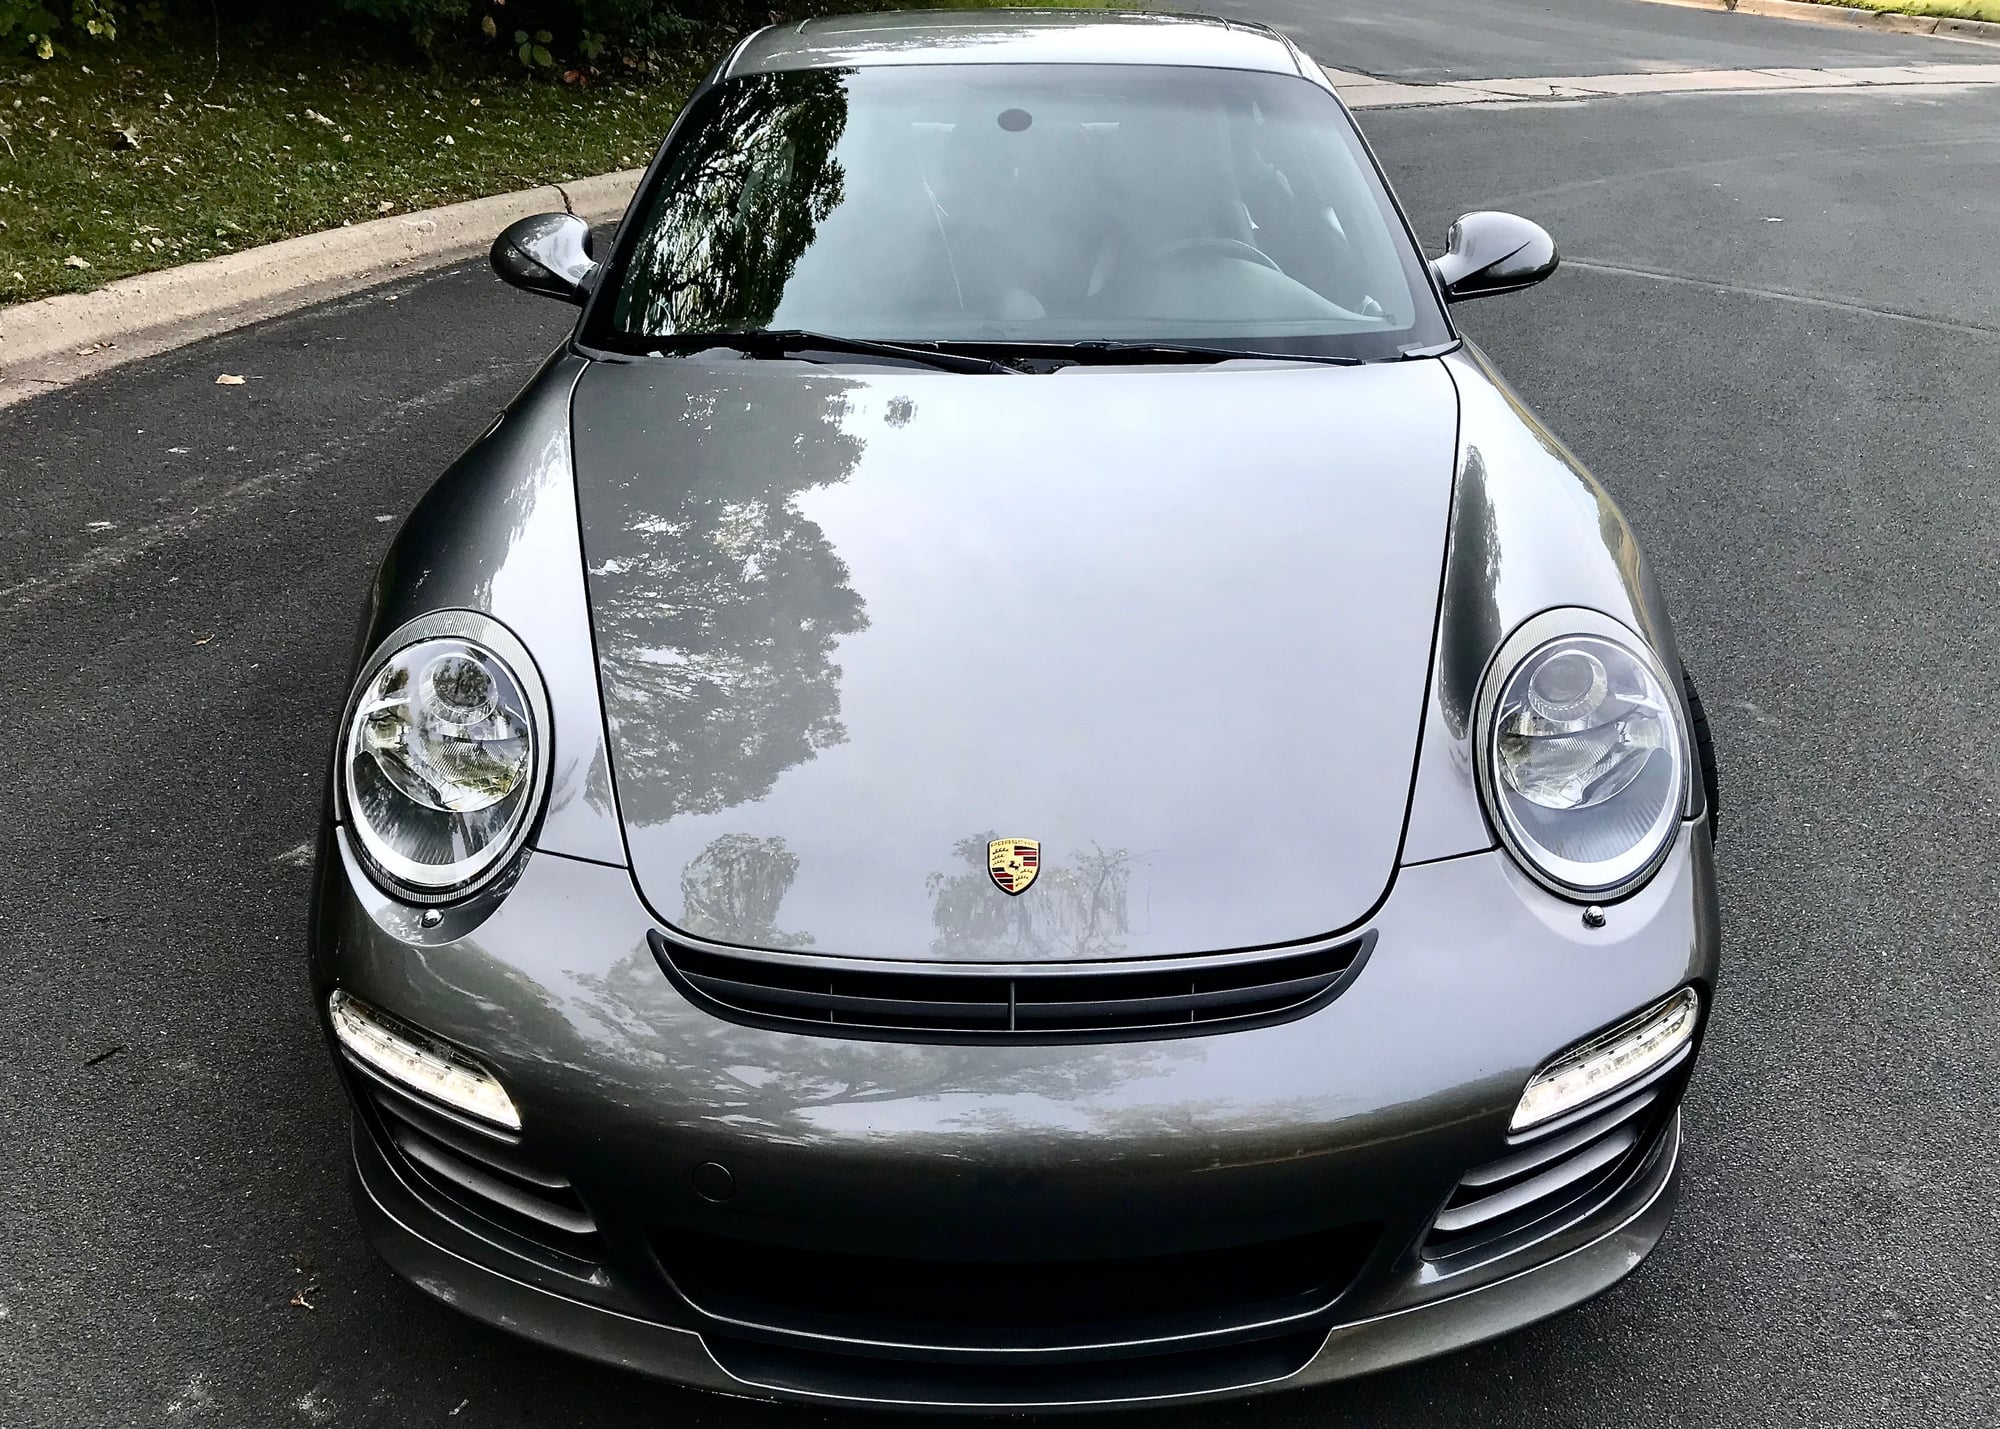 2009 Porsche 911 - 2009 Porsche 911 C4S - Used - VIN WP0AB29969S720397 - 75,000 Miles - 6 cyl - AWD - Automatic - Coupe - Gray - Bloomington, MN 55438, United States